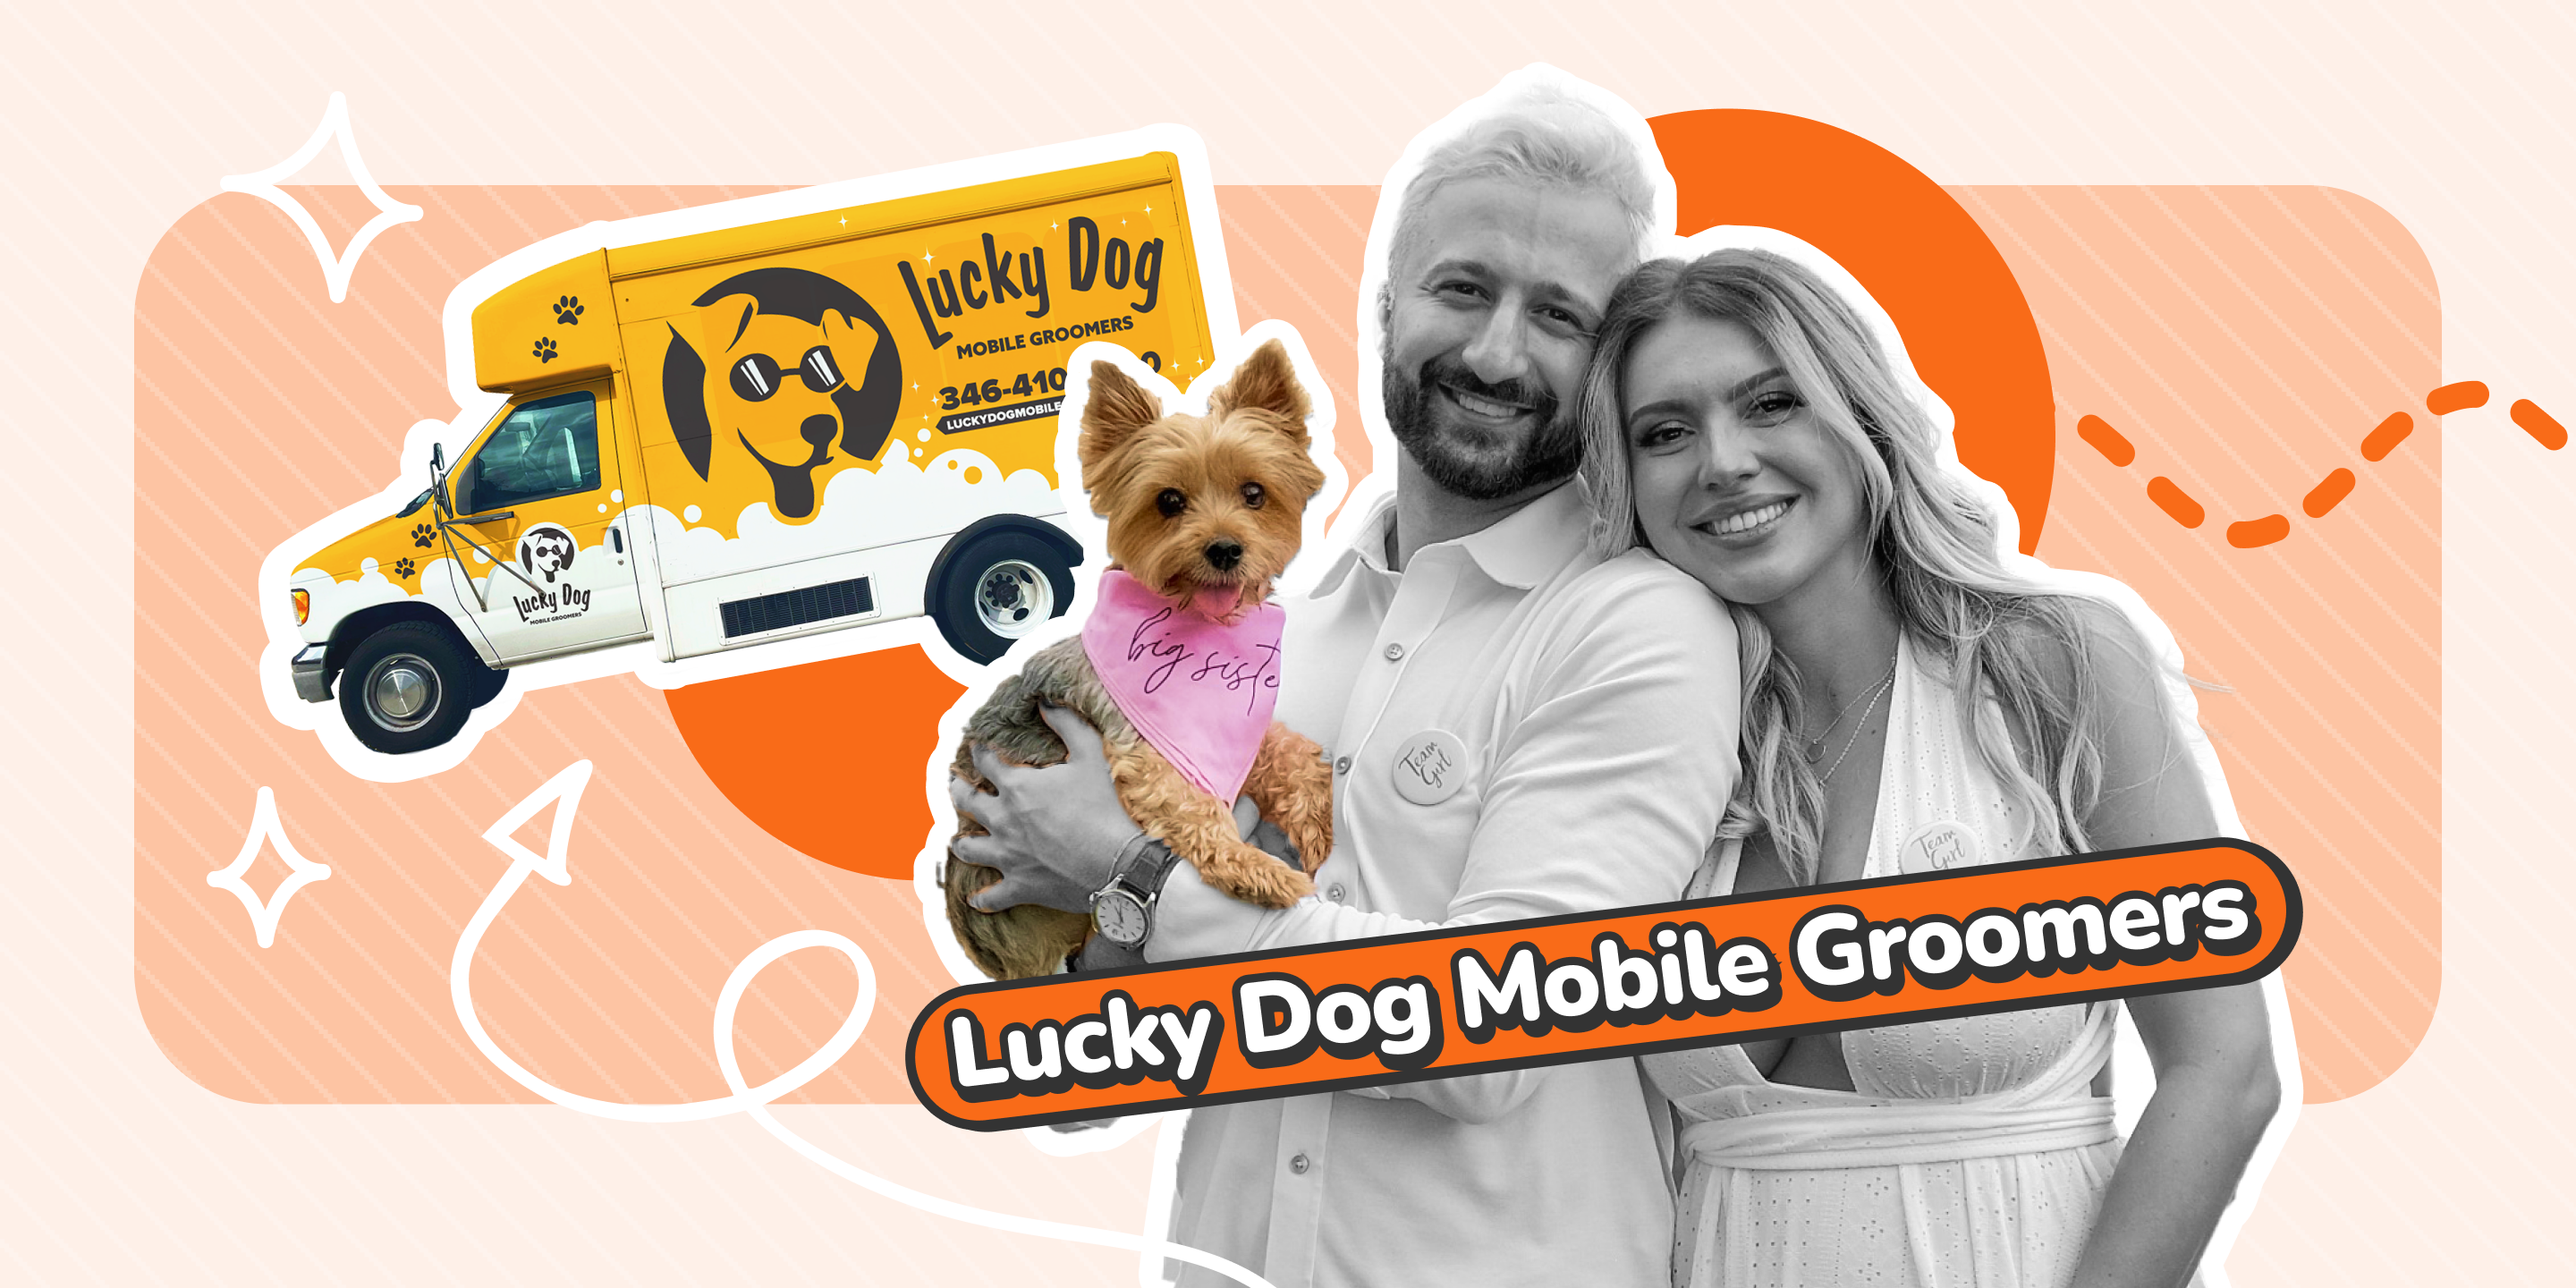 Yellow Trucks and Happy Customers: How Lucky Dog Mobile Groomers Licensed the Brand